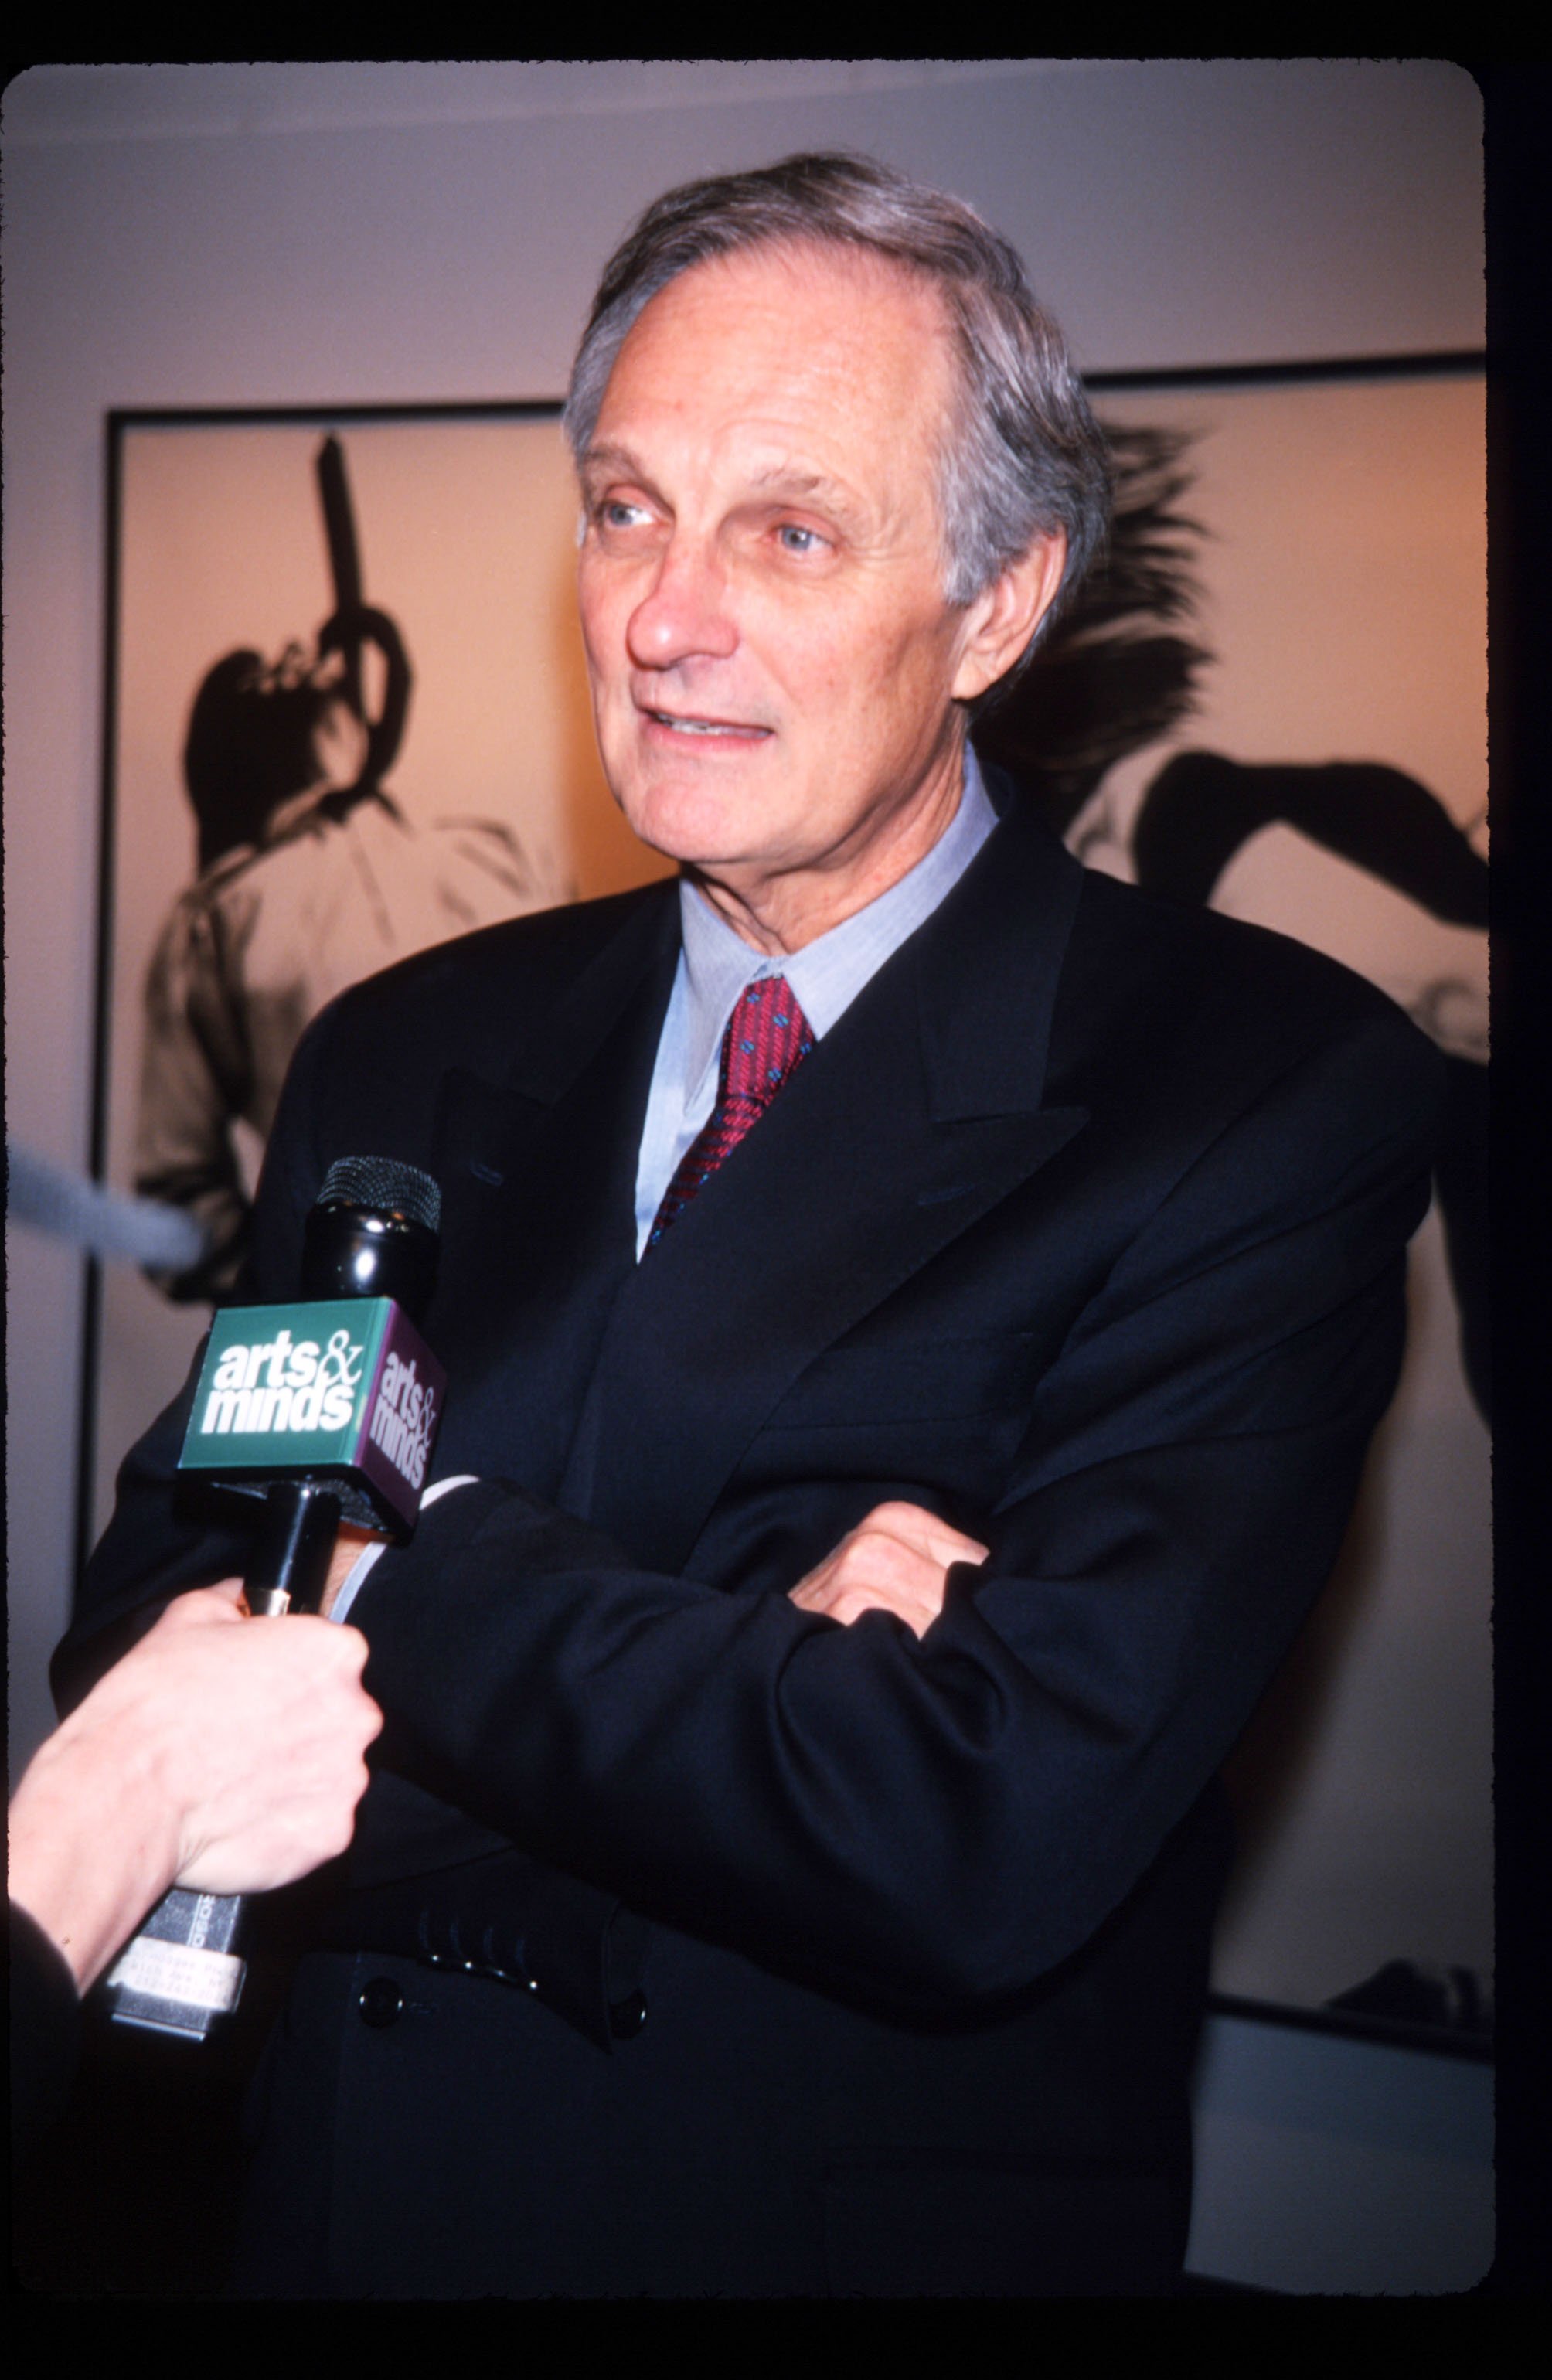 Alan Alda attends the premiere of 